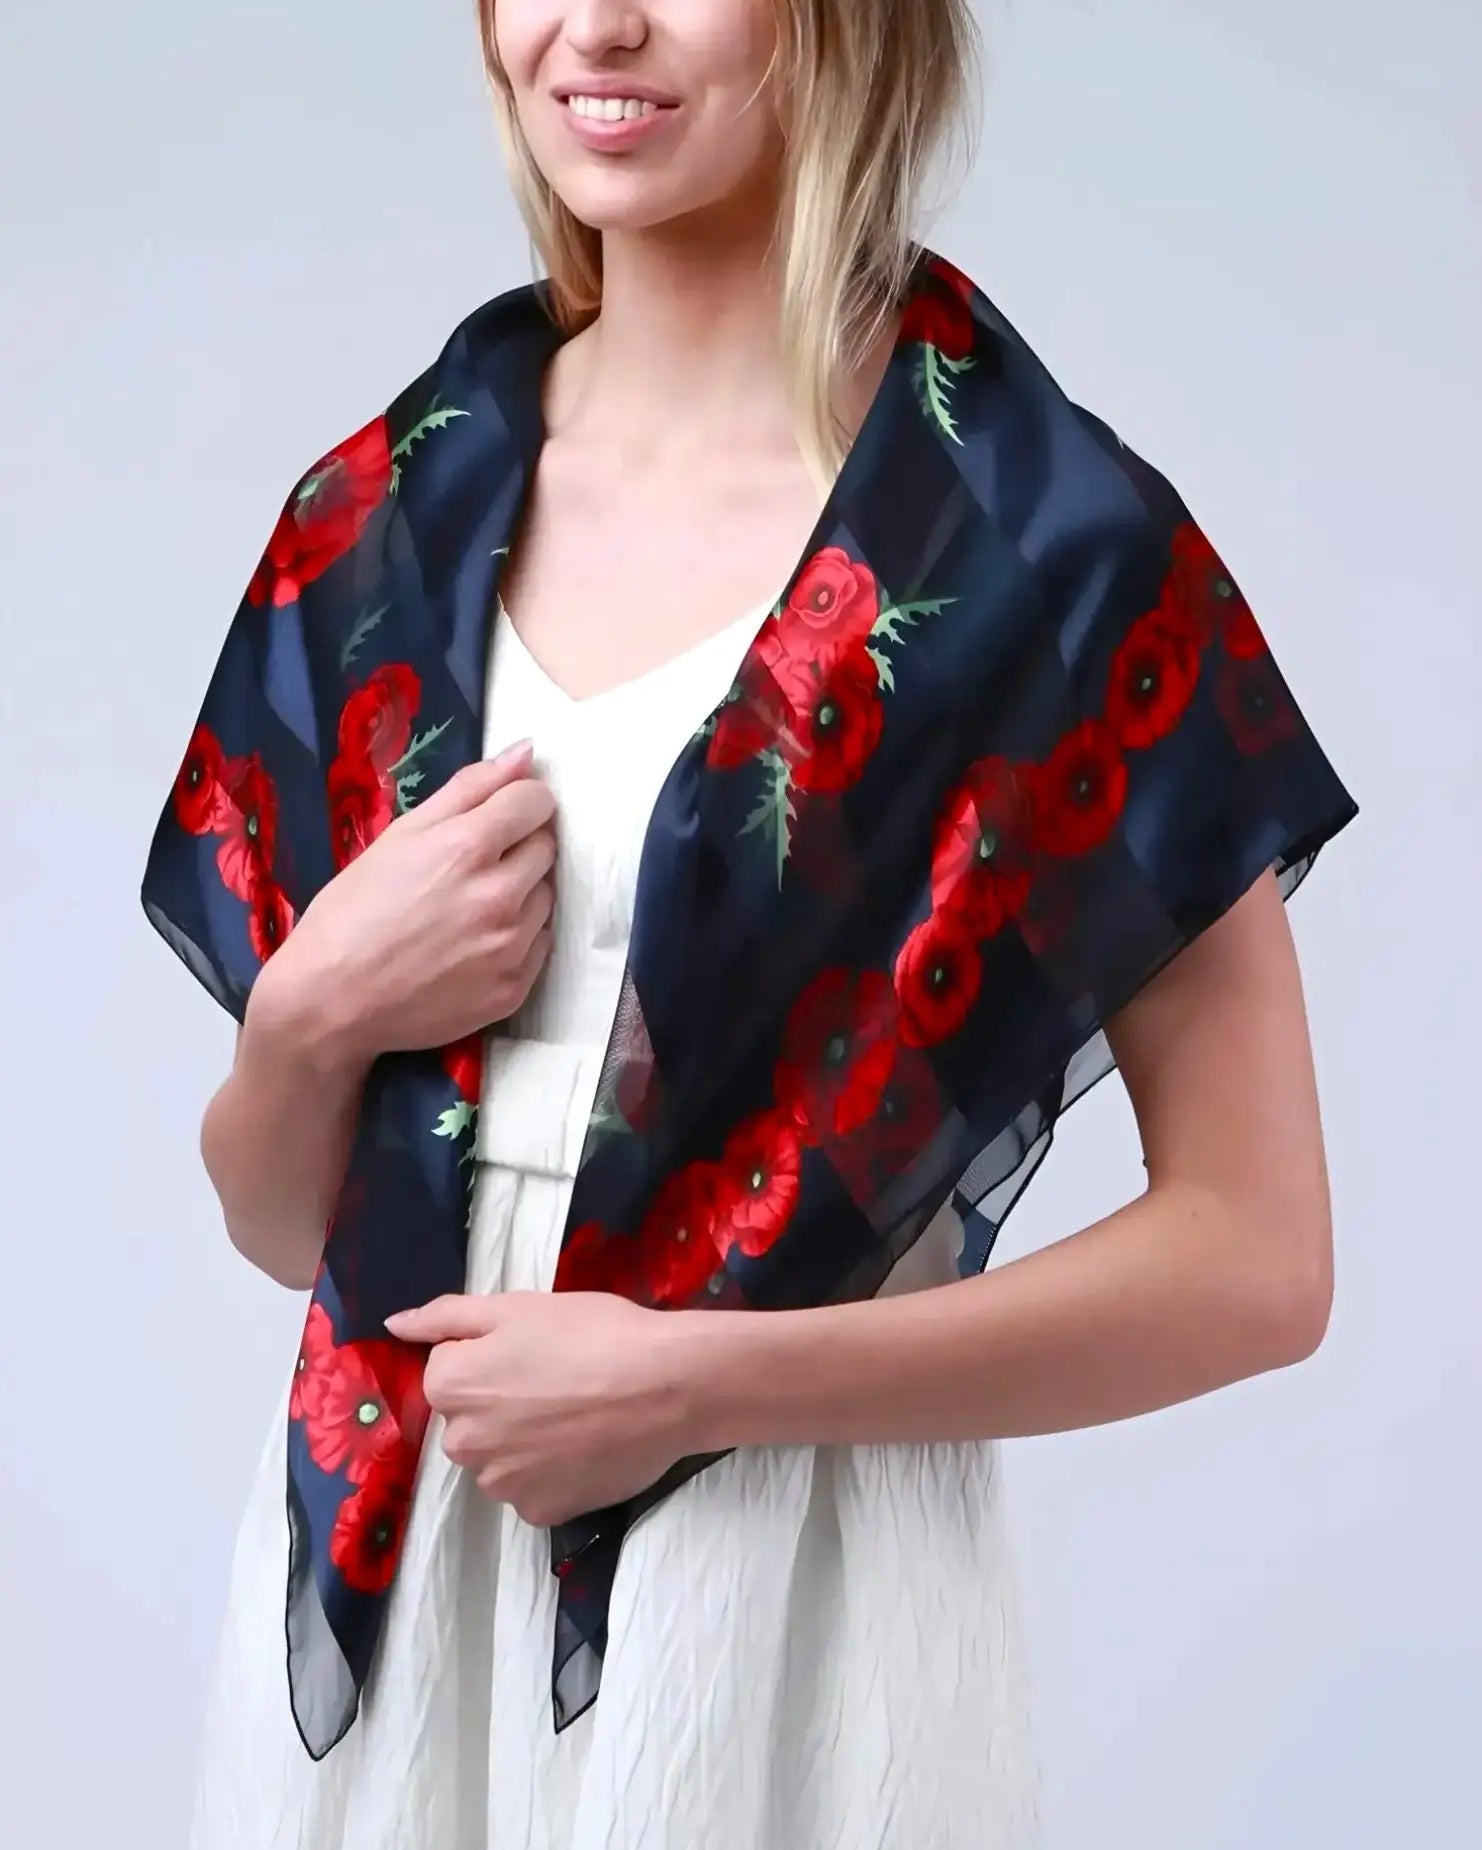 Large square poppy scarf in black and red floral print worn by woman.